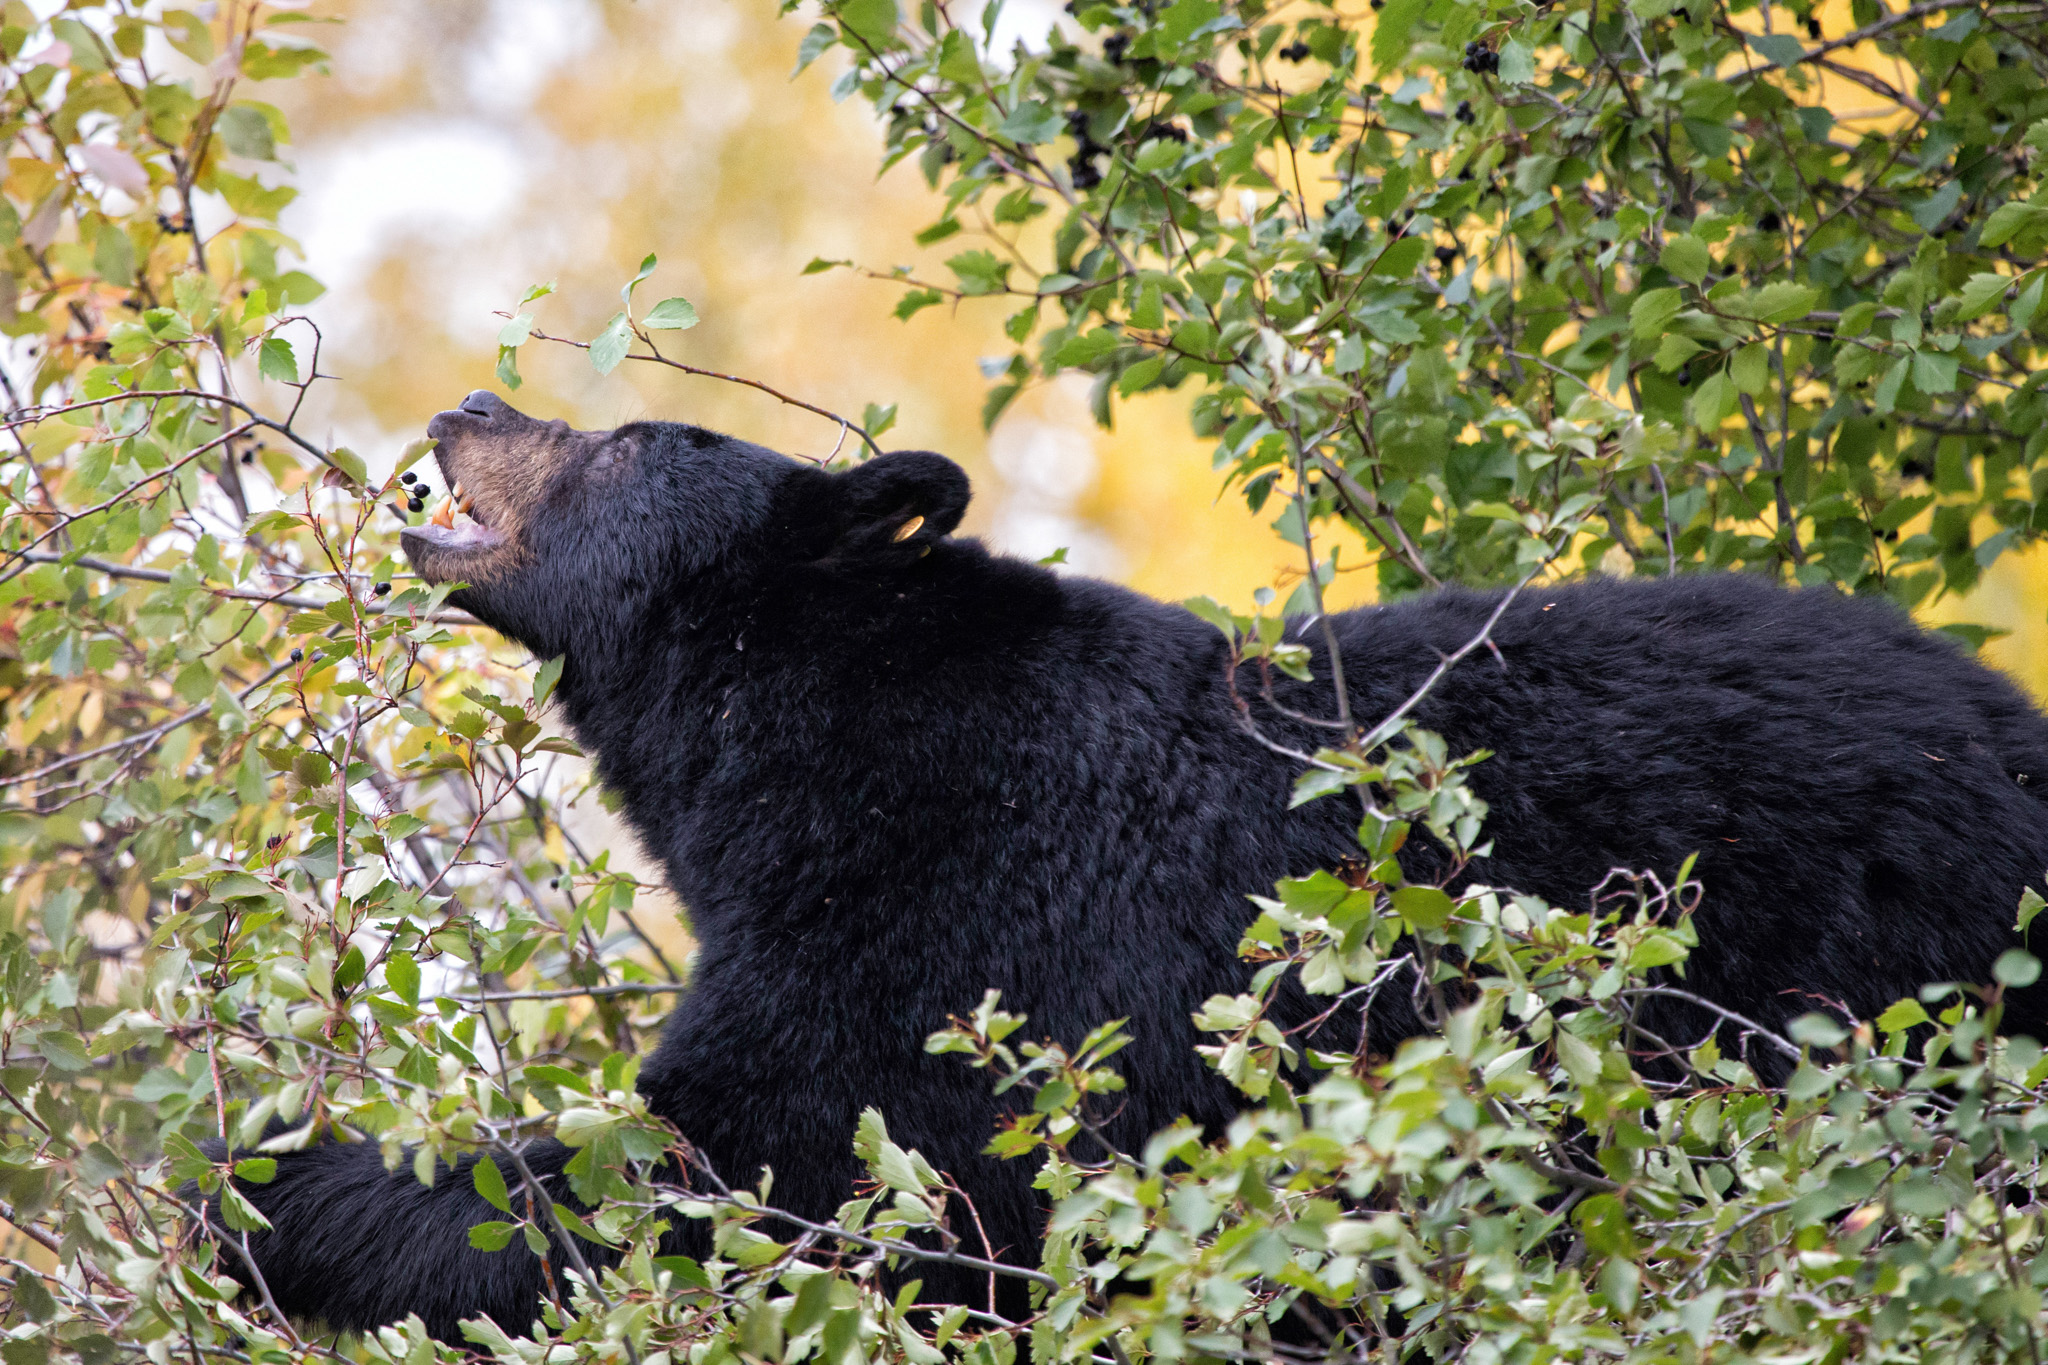 Black bears eat berries of all kinds throughout the summer.